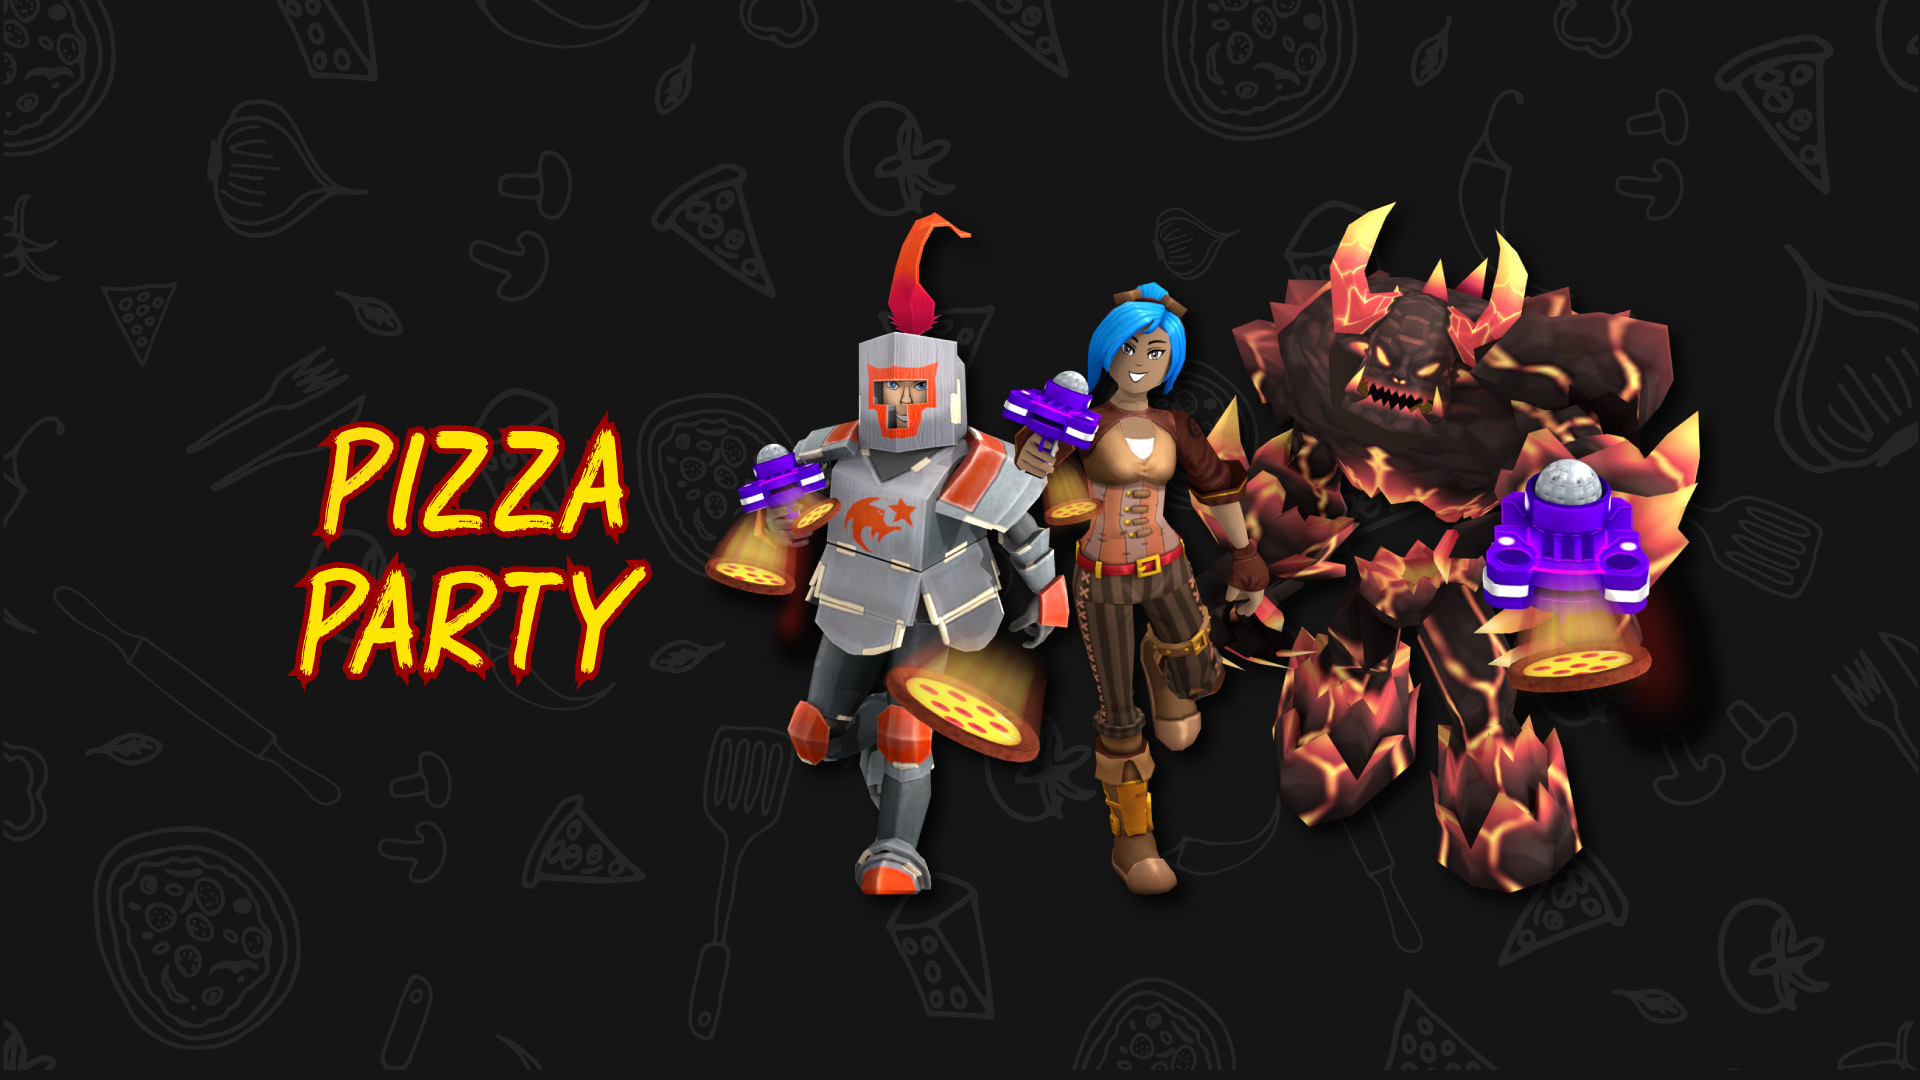 Pizza Party Event Work At A Pizza Place Wiki Fandom - work at a pizza place roblox wiki